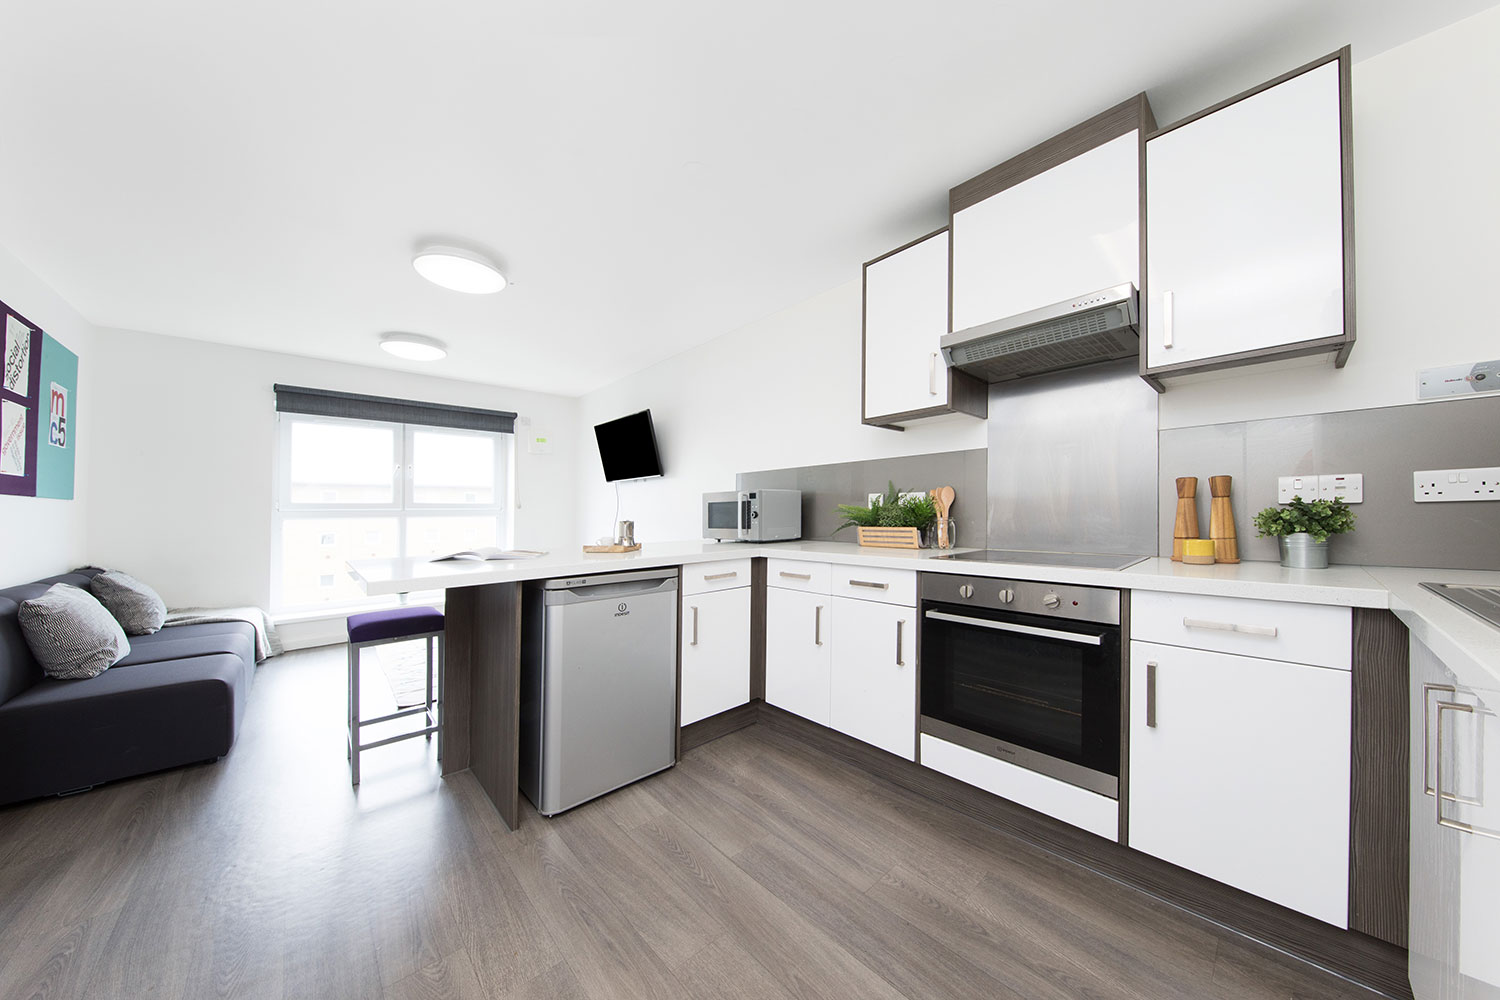 Shared kitchen area at Cambrian Point